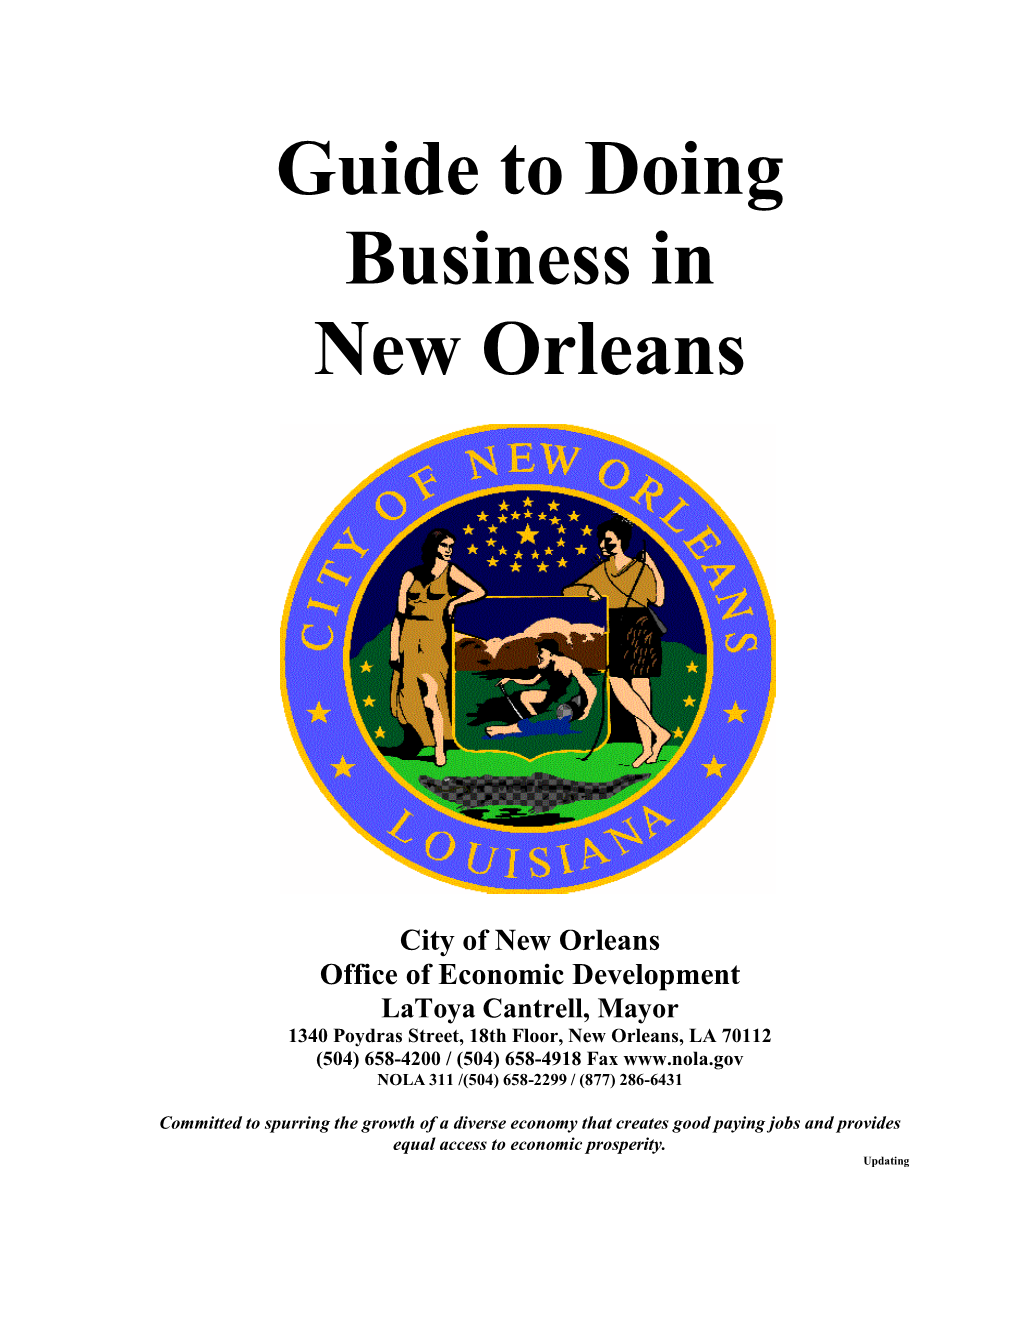 Guide to Doing Business in New Orleans